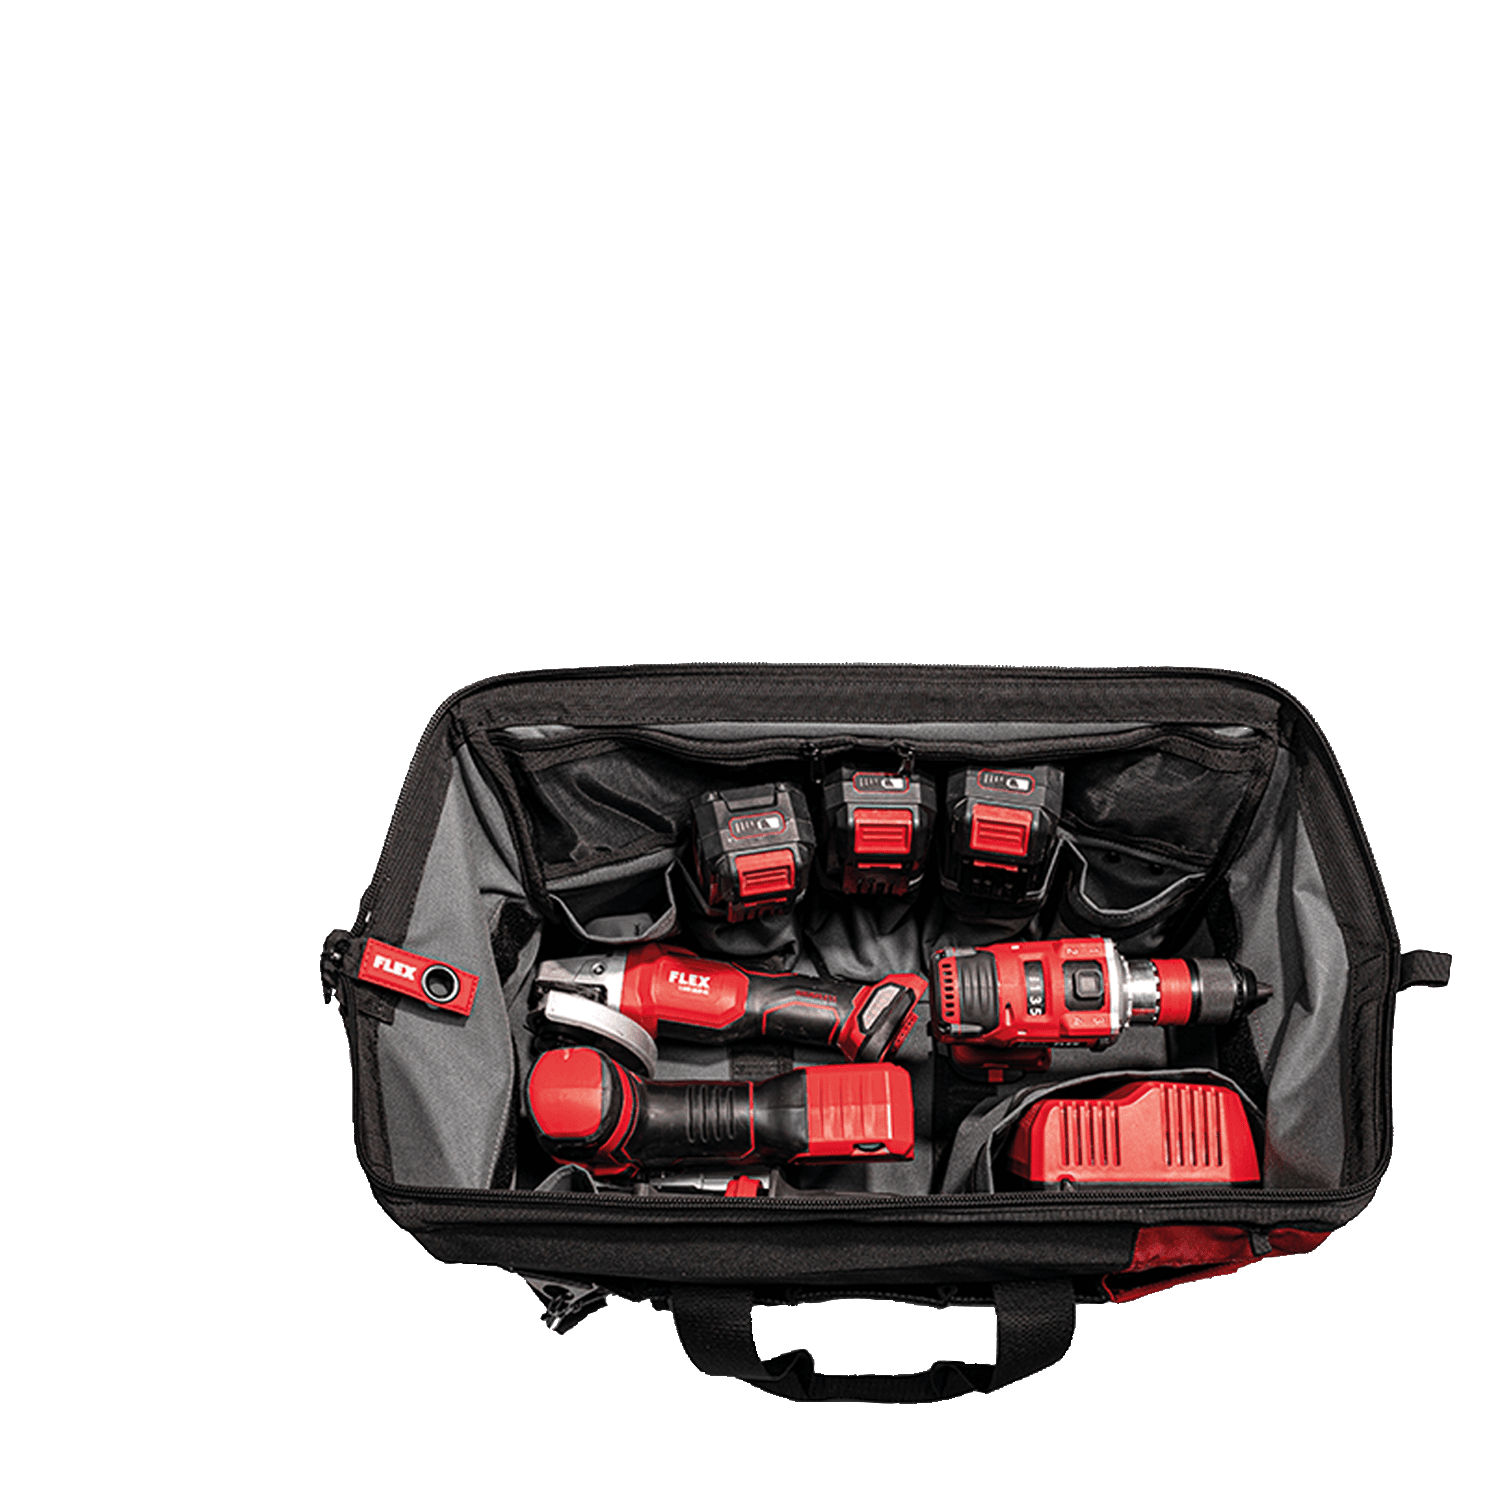 FLEXPACK bag with various FLEX cordless power tools and charger